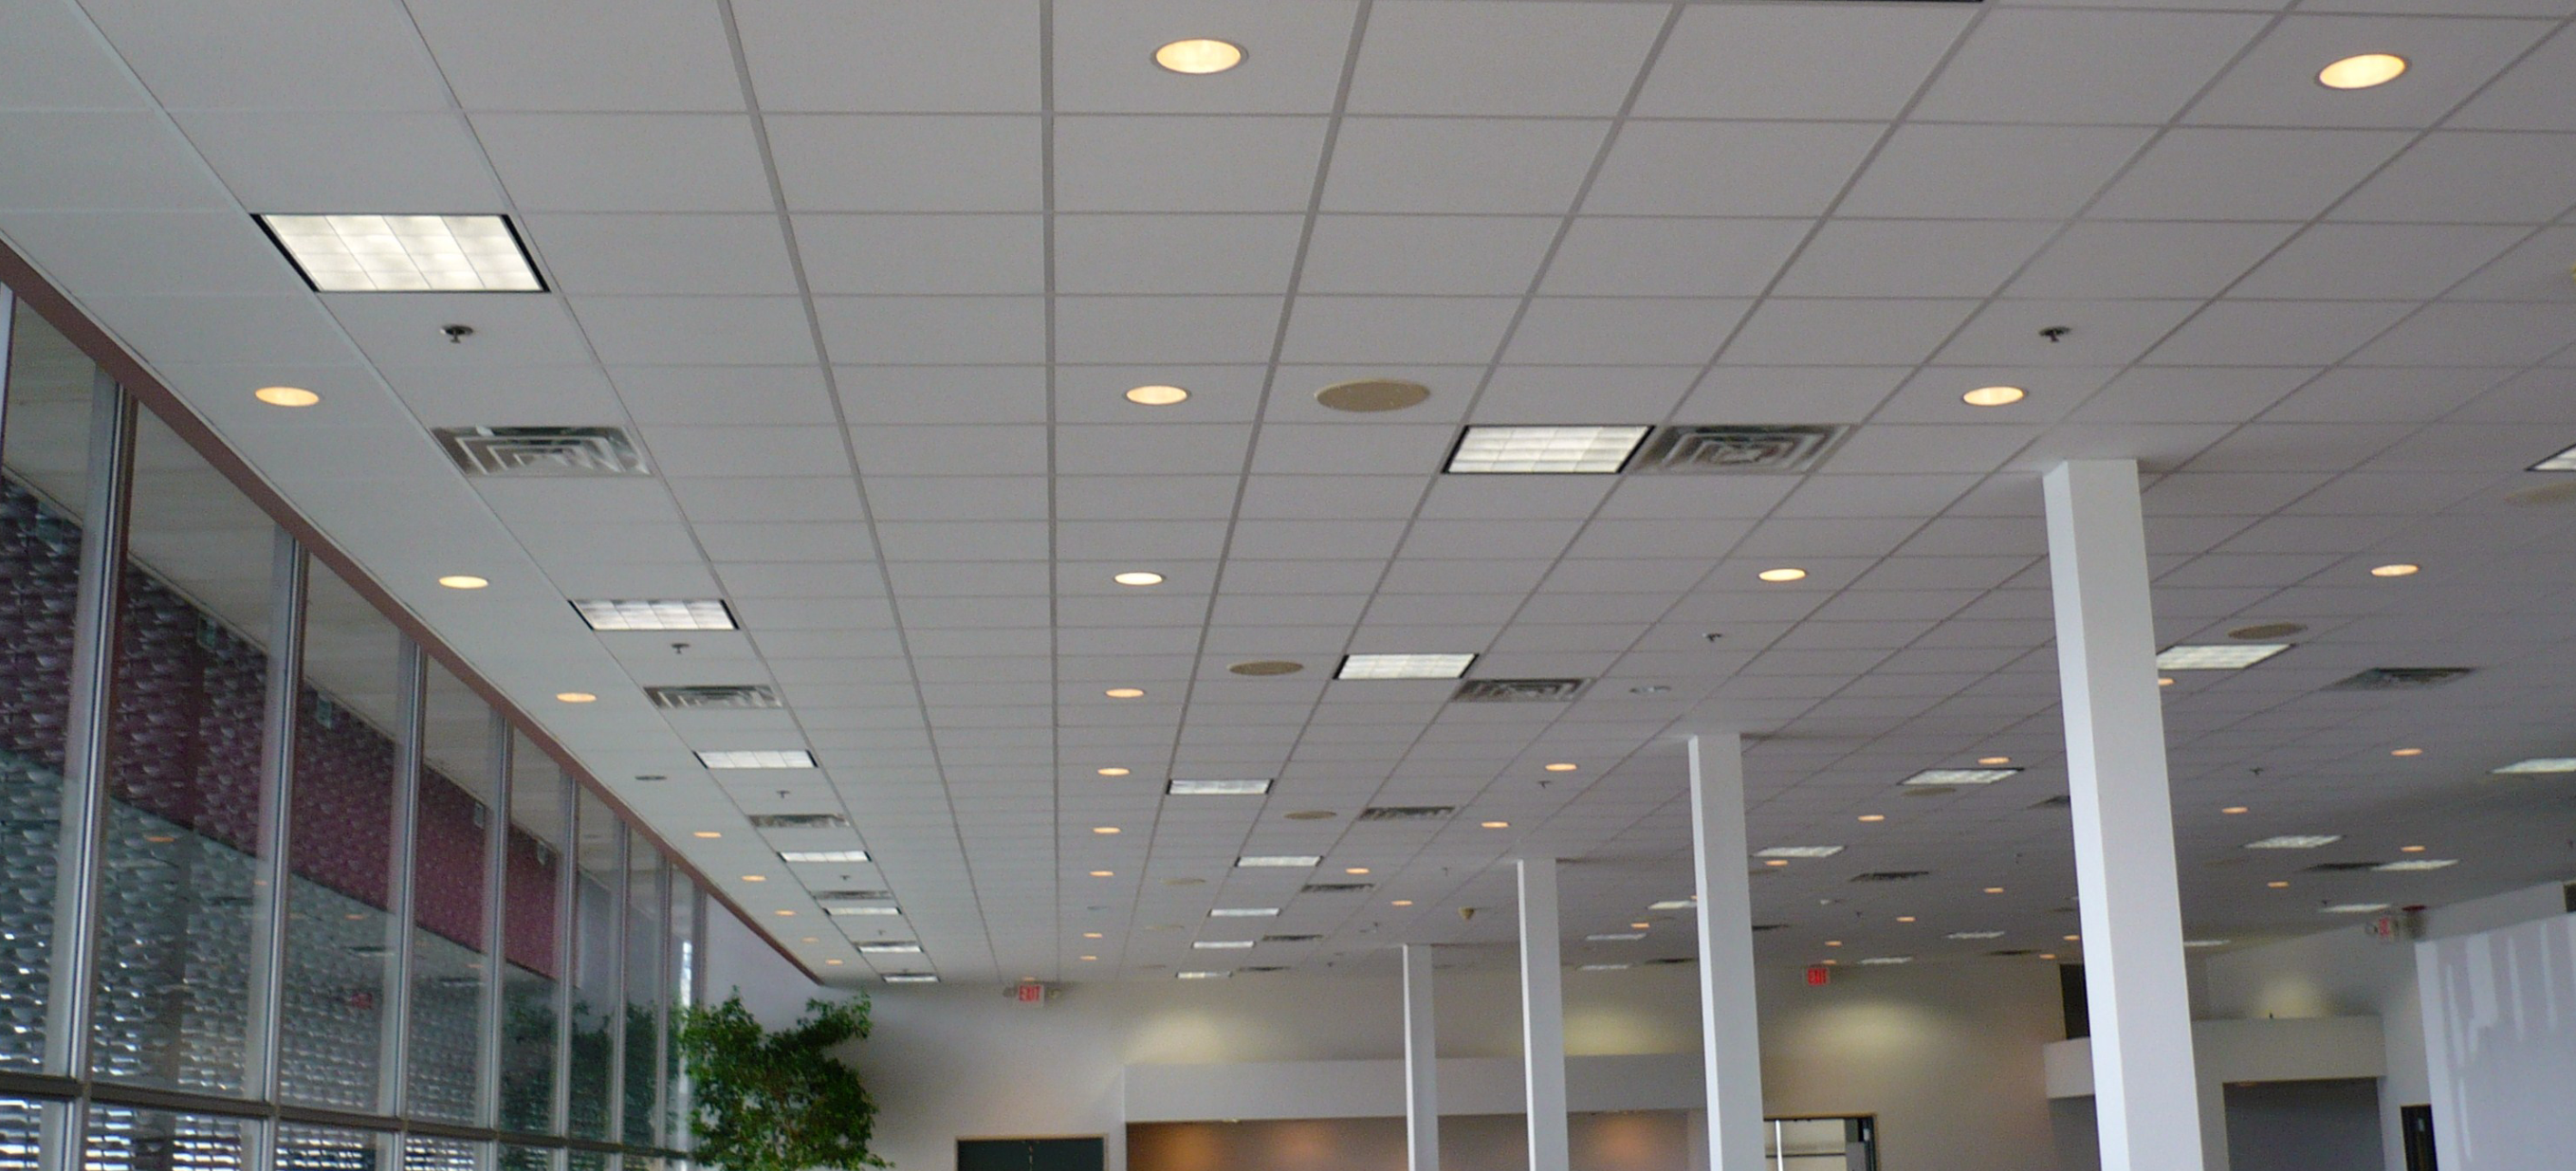 Acoustic Ceiling Company in Houston